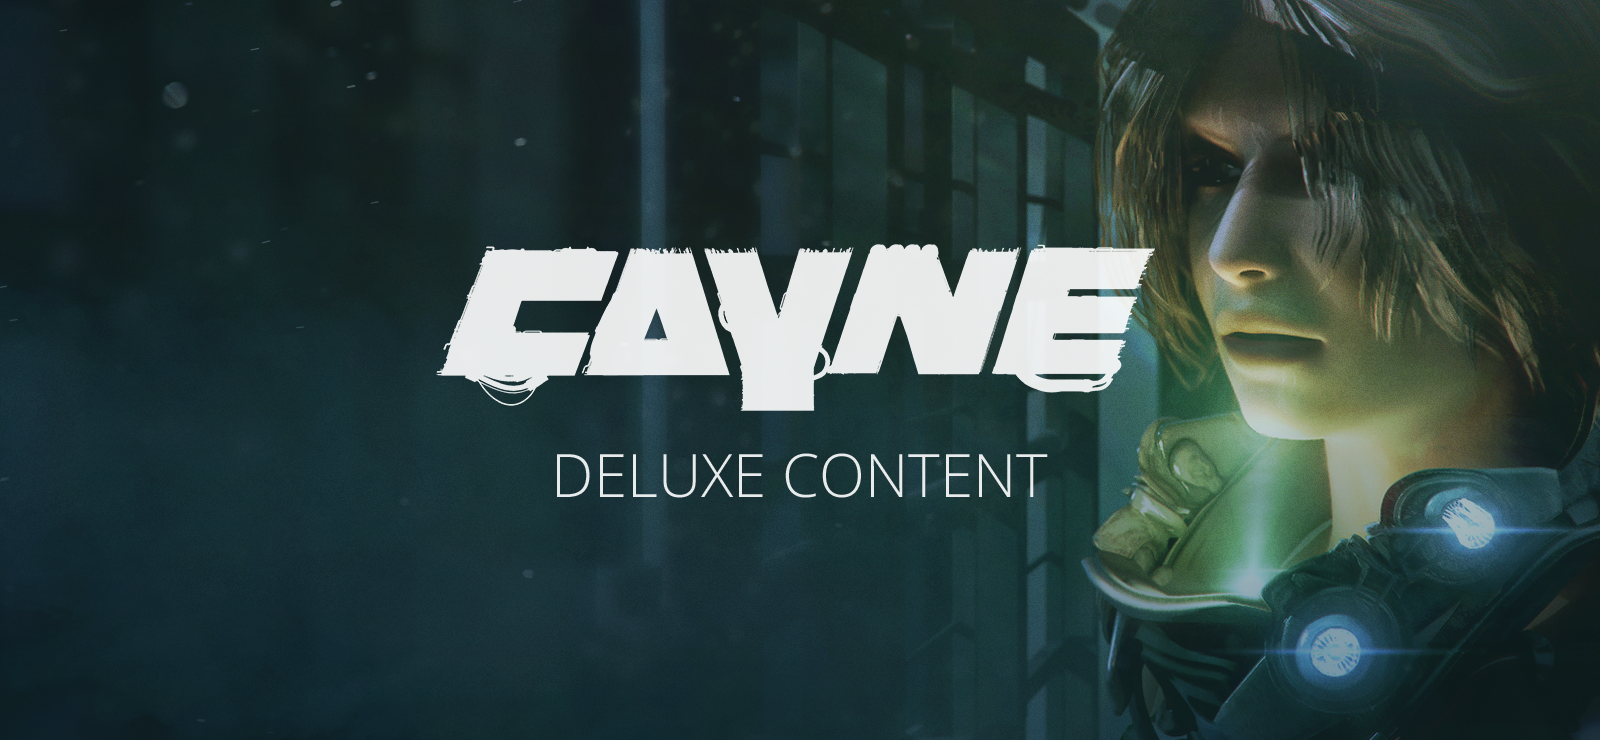 CAYNE: DELUXE CONTENT